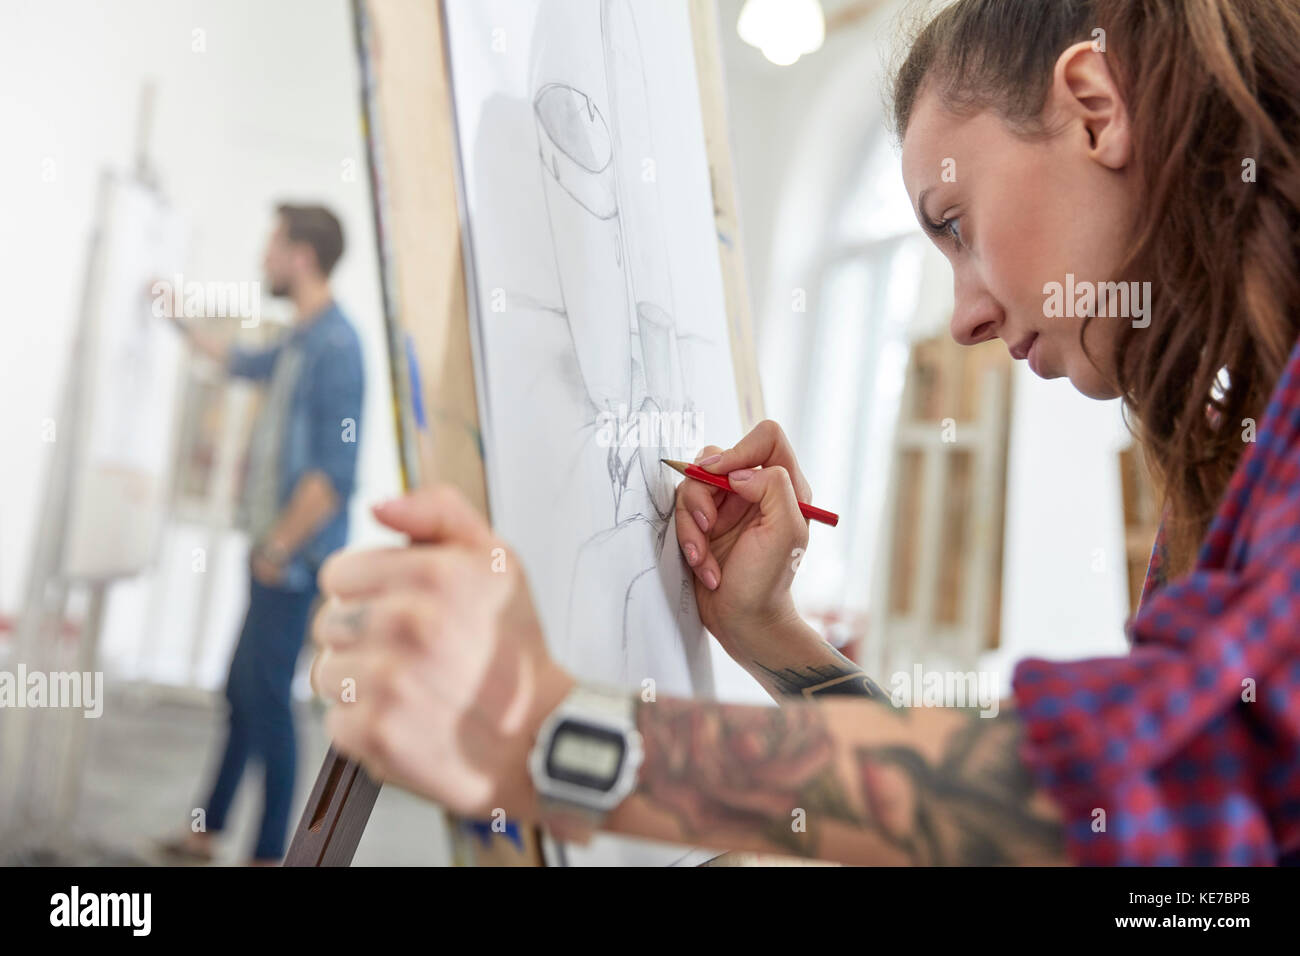 Focused female artist with tattoo sketching at easel in art class studio Stock Photo